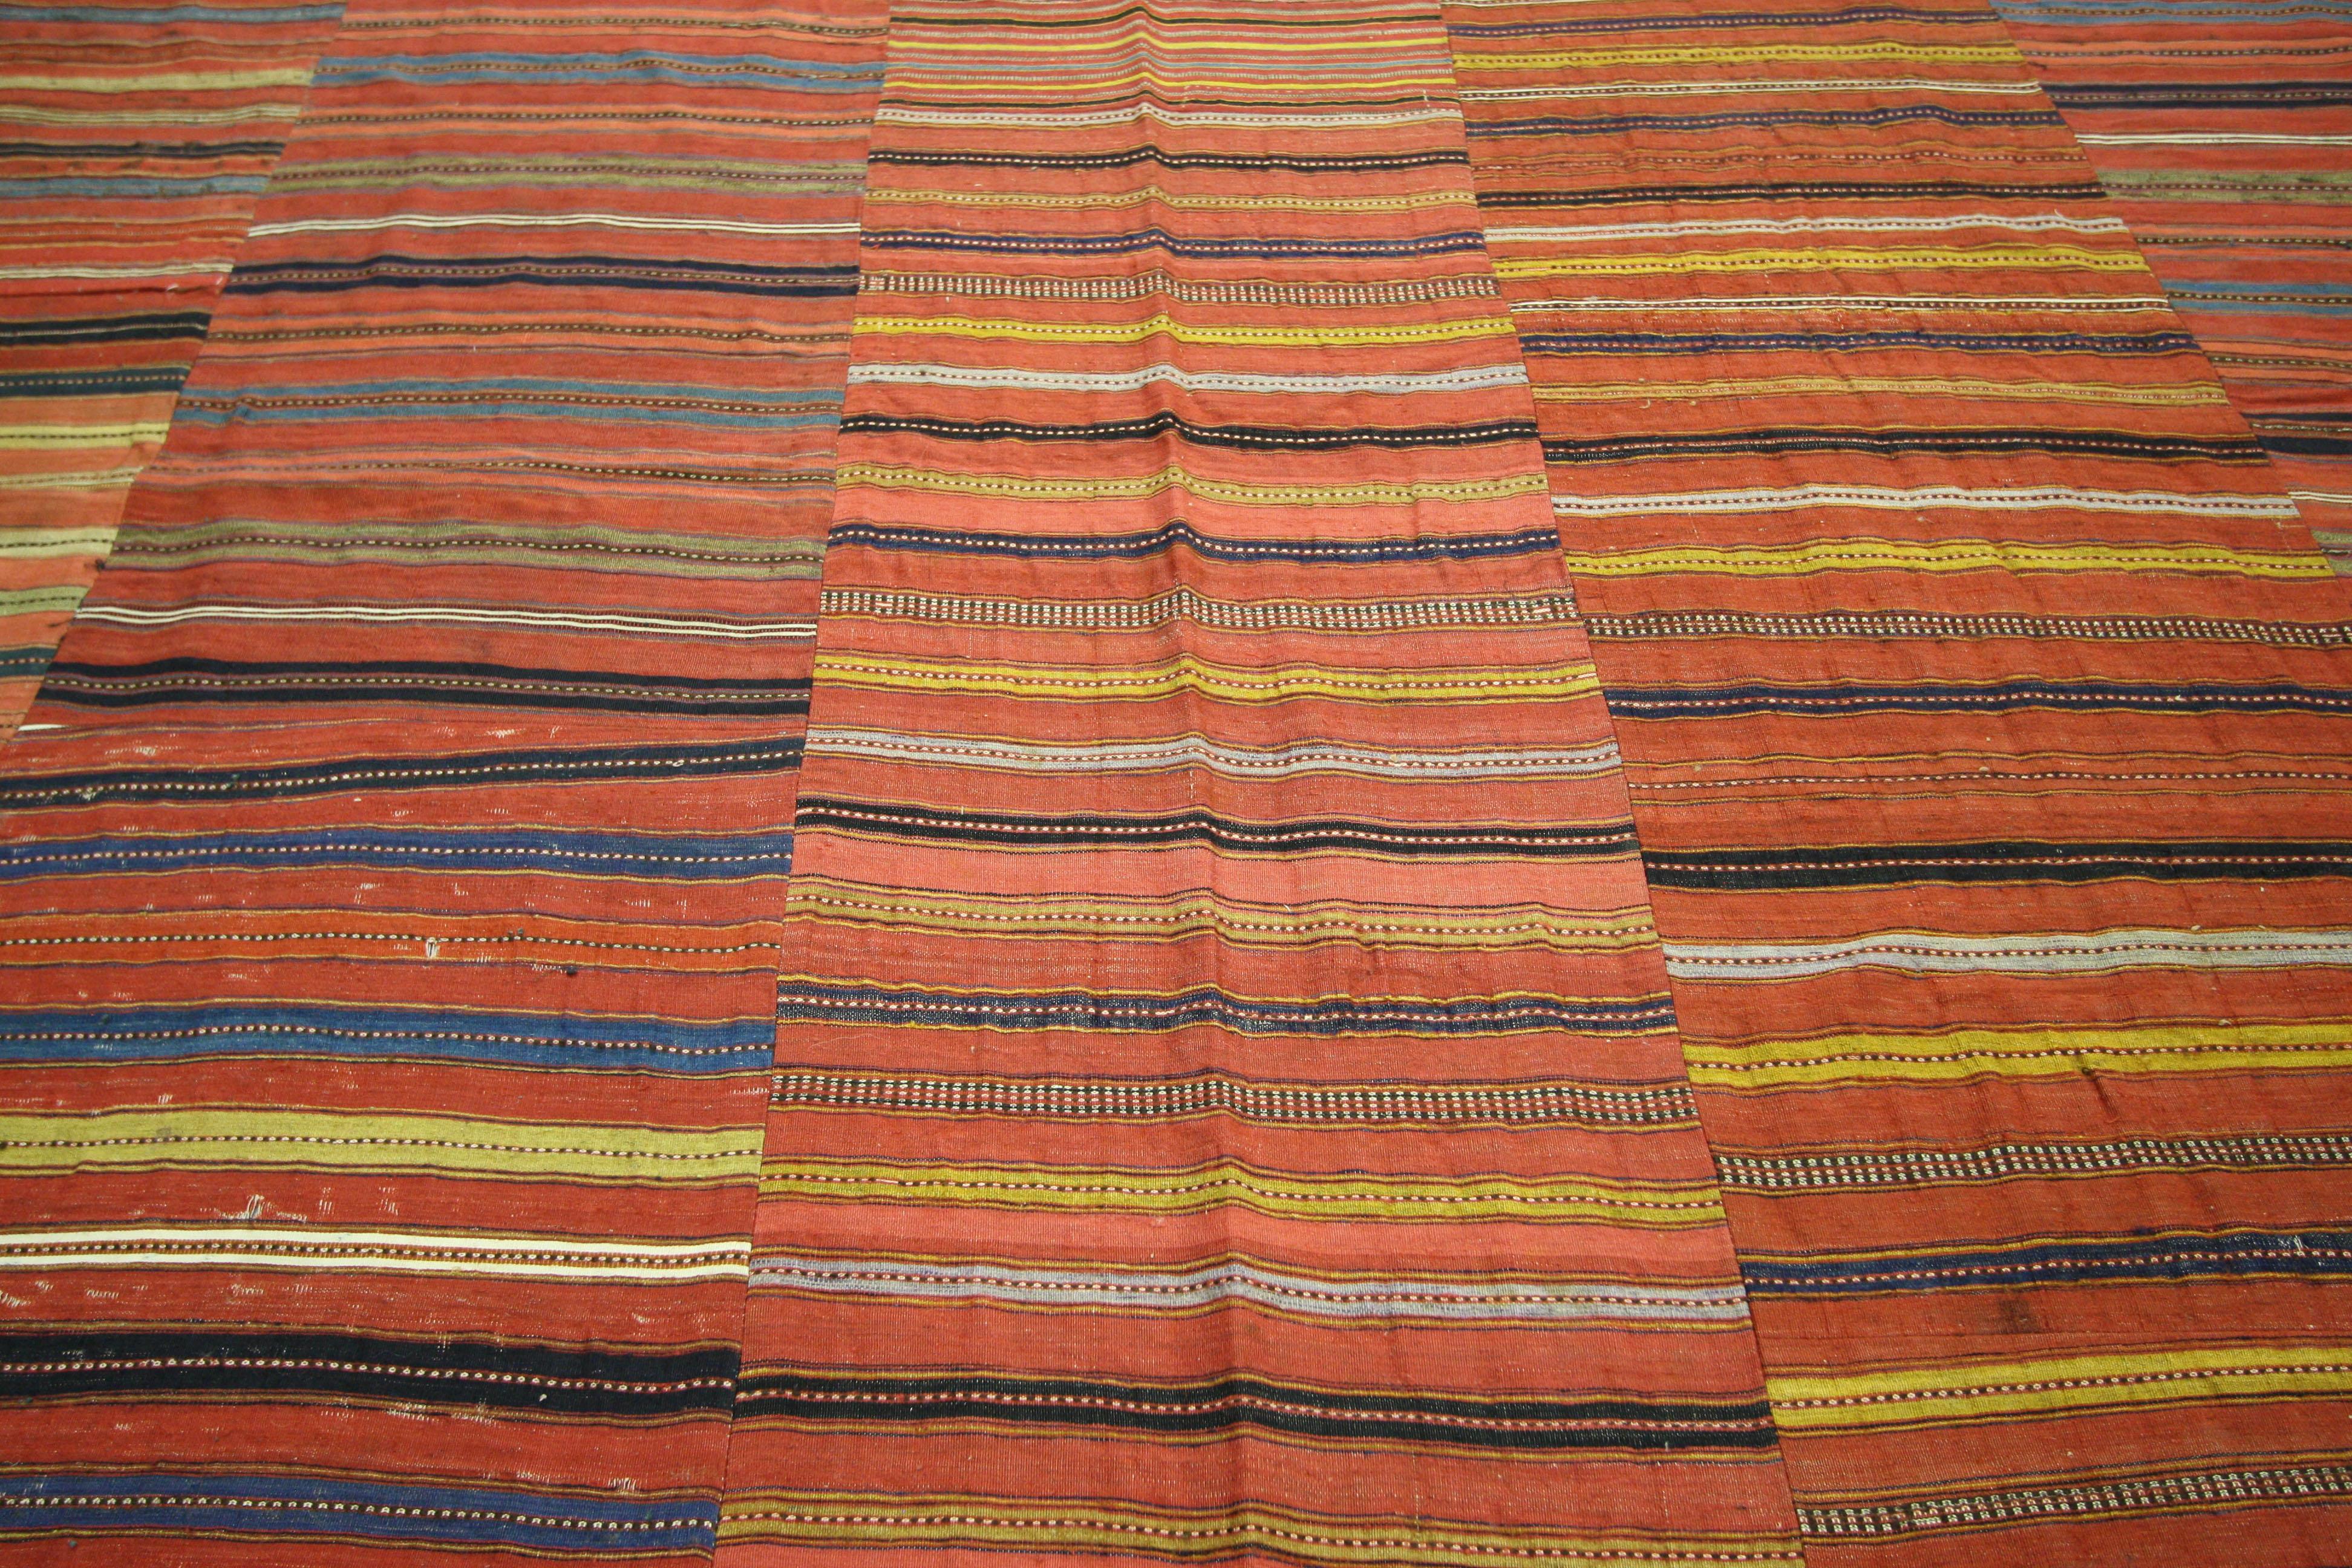 Industrial Distressed Vintage Turkish Kilim Rug with Bayadere Stripes and Rustic Style